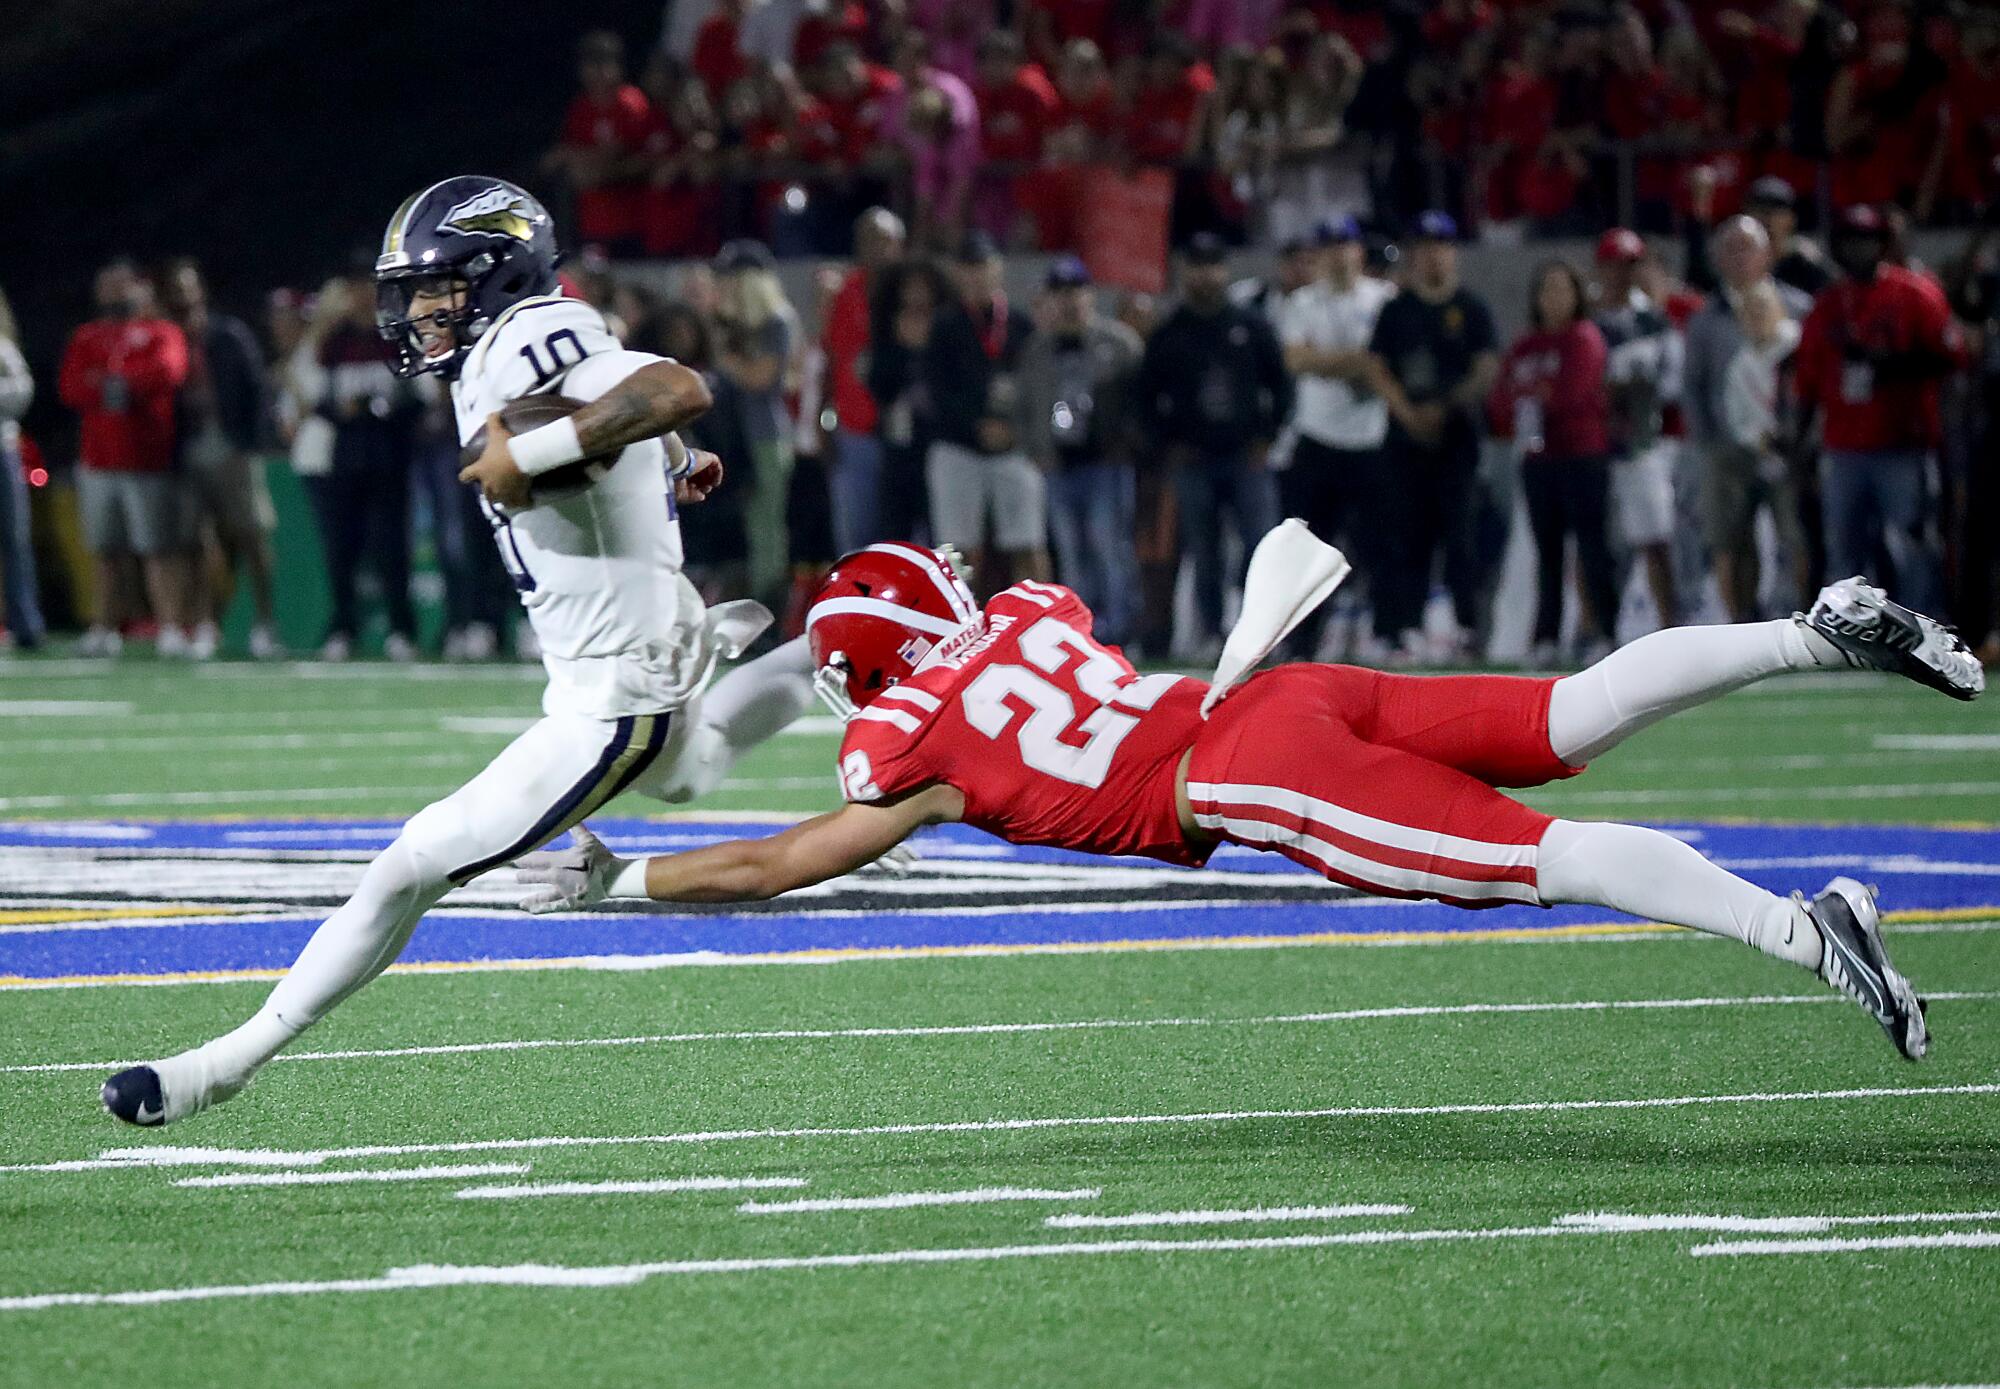 A St. John Bosco ball carrier eludes a leaping Mater Dei tackler 